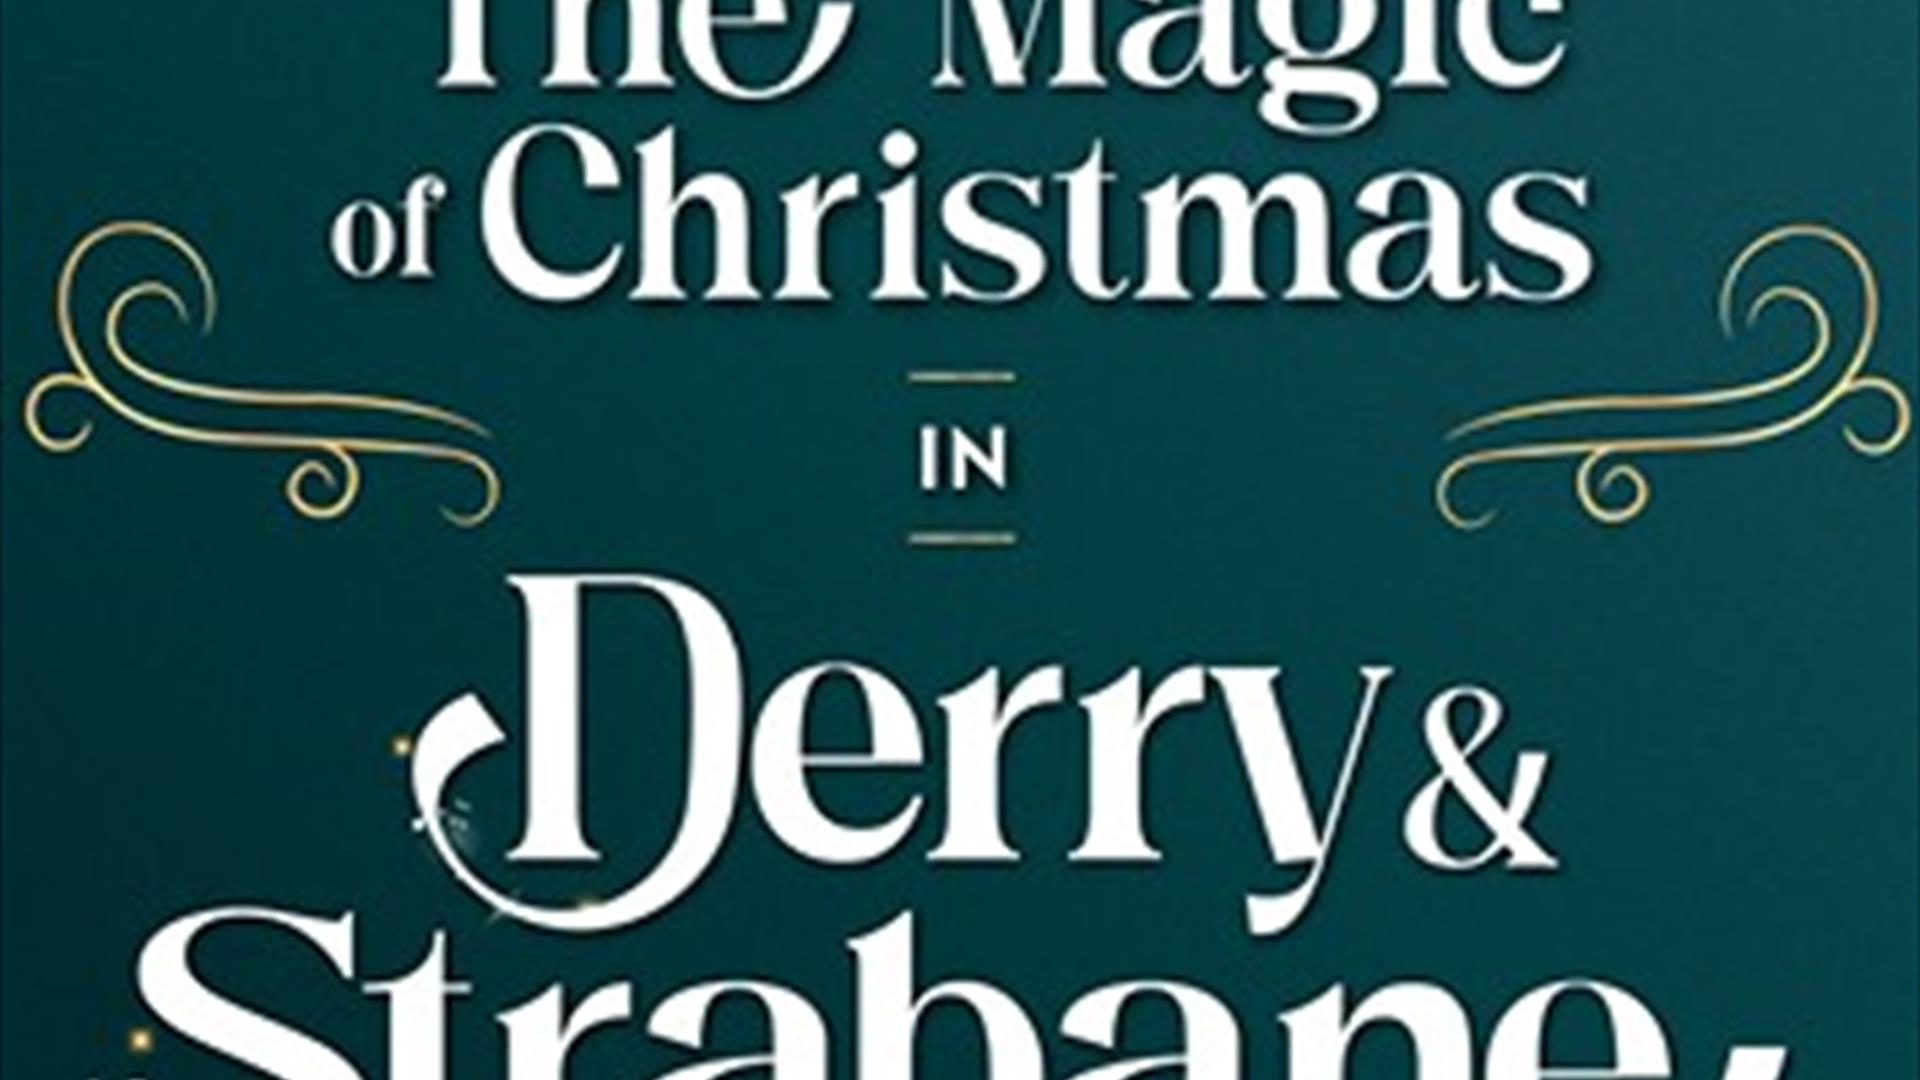 Unwrap the magic of Christmas in Derry & Strabane